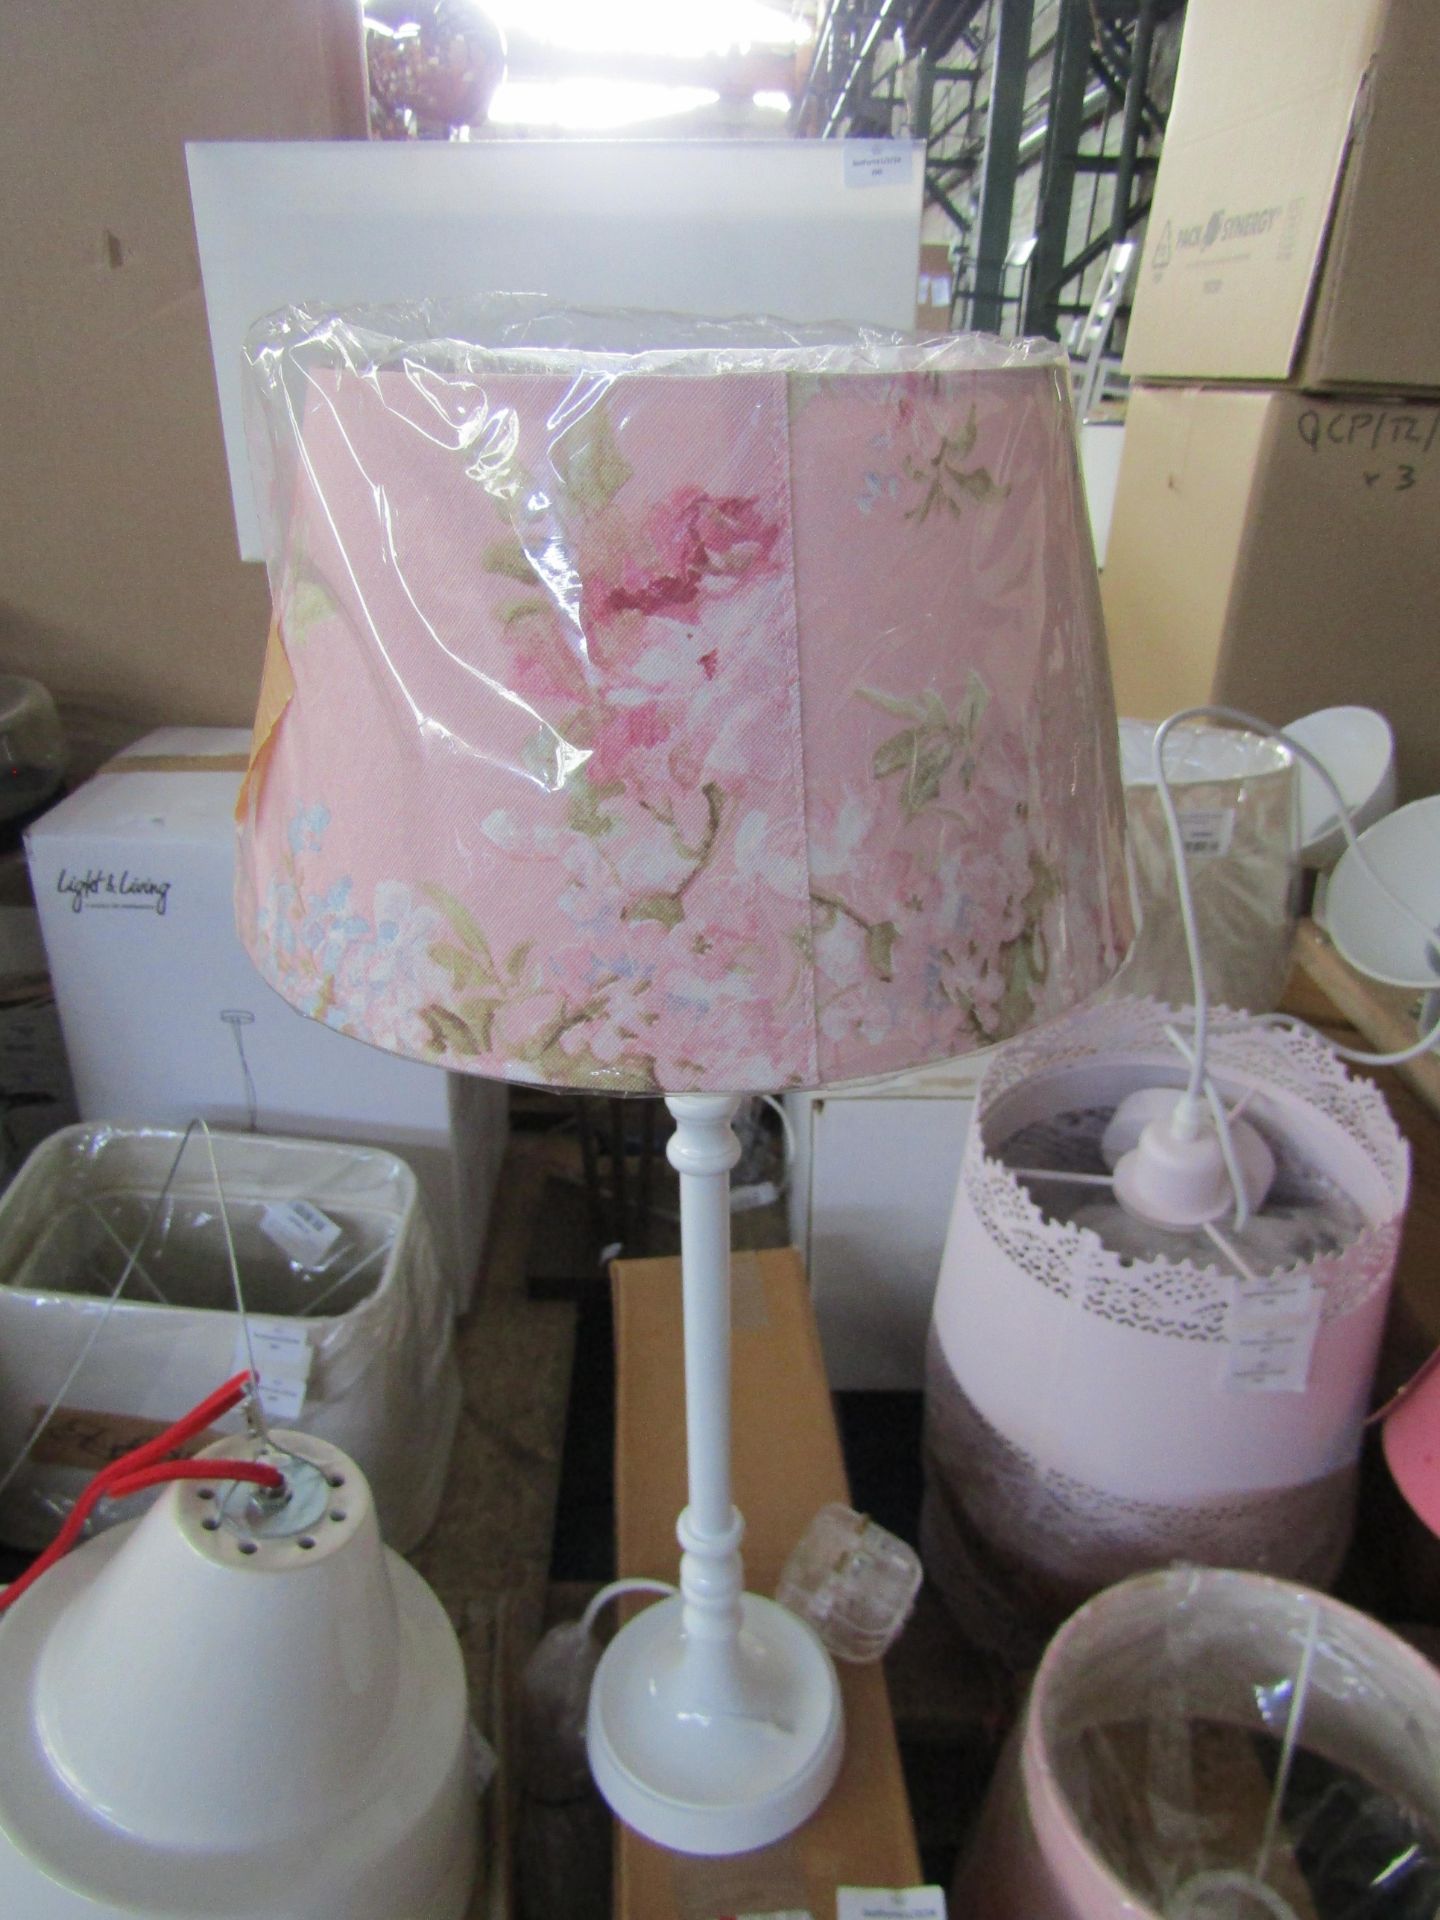 Vintage Style Pink Floral Table Lamp. Size: H40cm - Shade Size: 25 x 18 x 14cm - RRP ?80.00 -